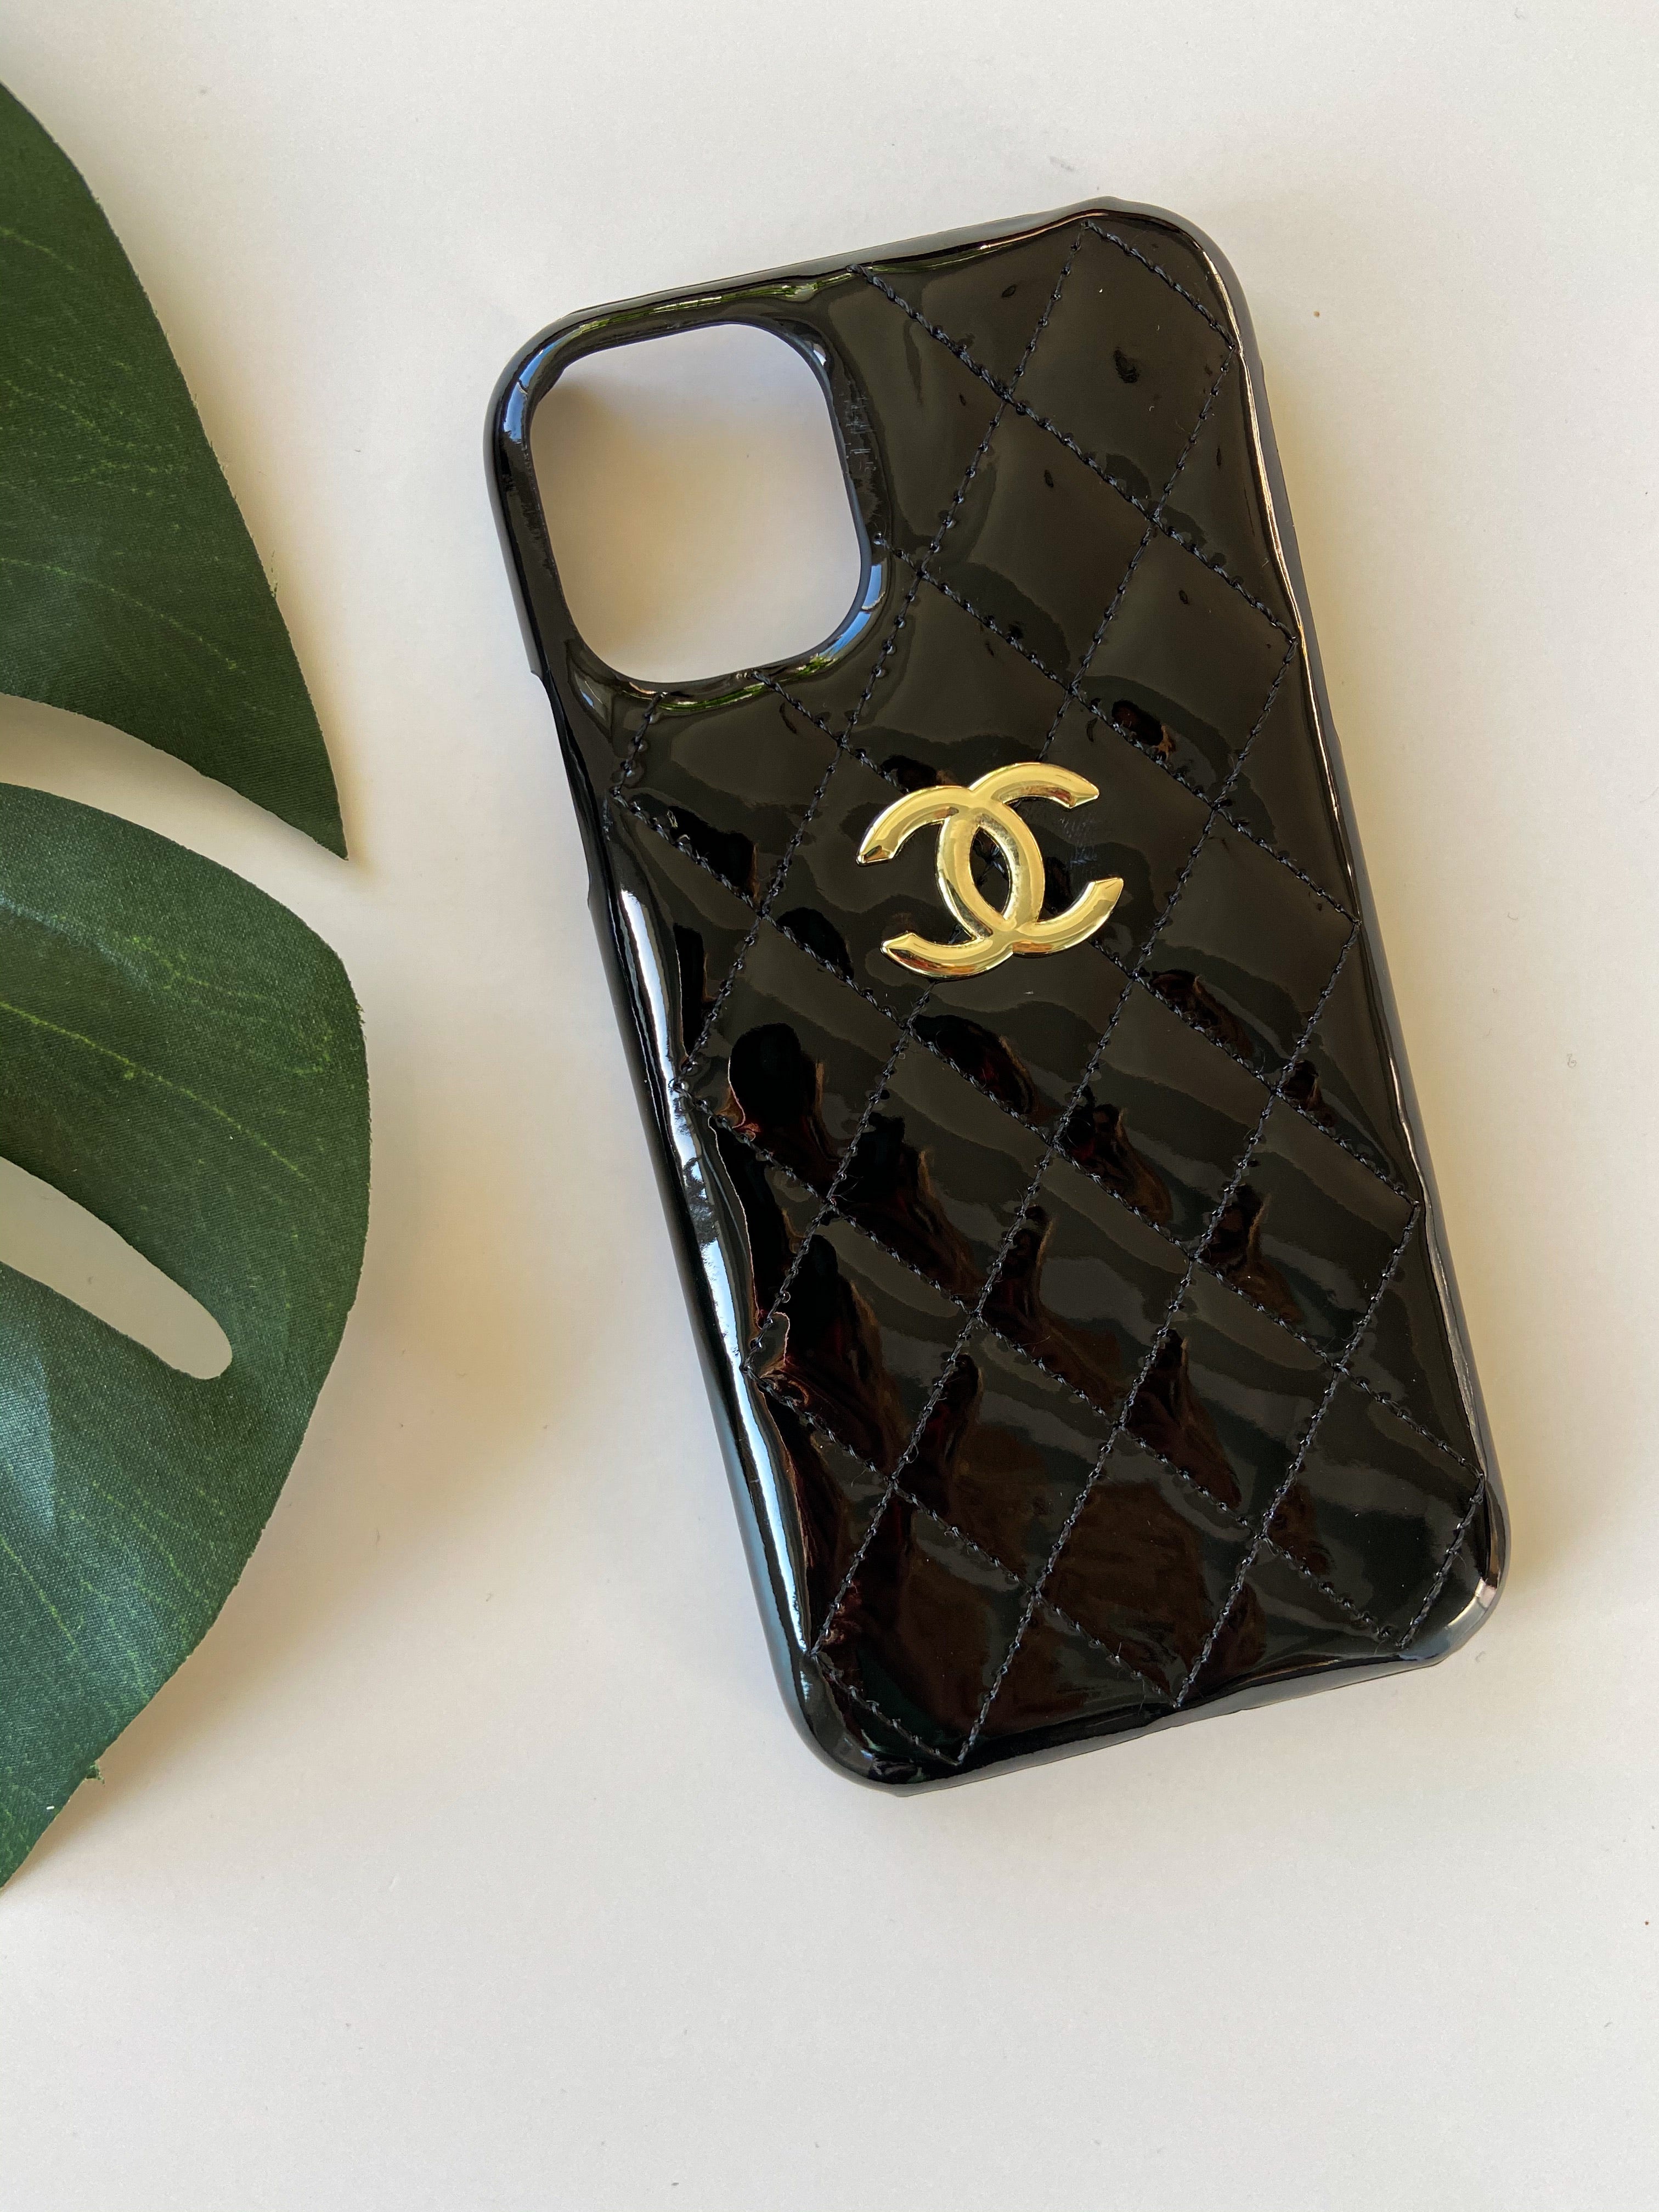 Chanel iPhone 11 Cases